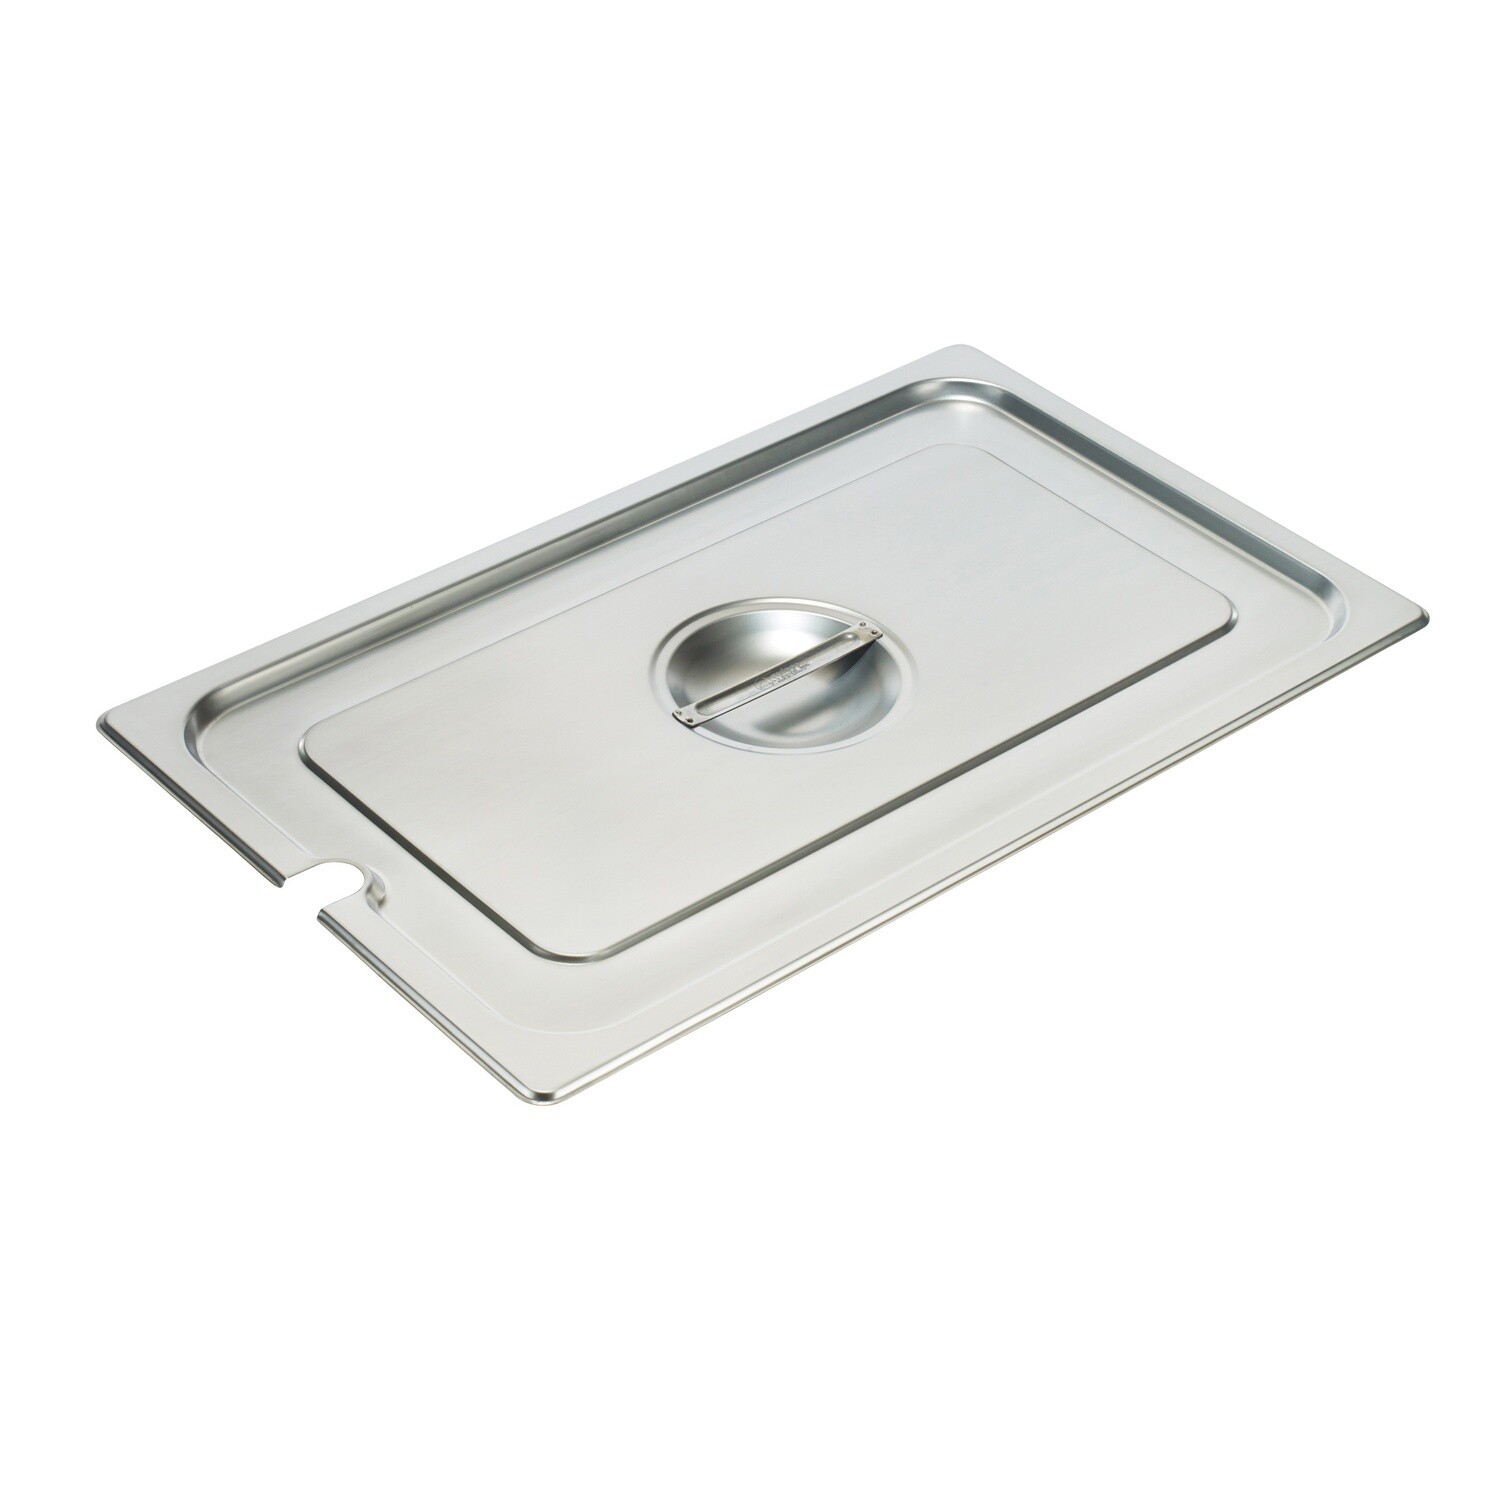 Winco SPCF Steam Table Pan Cover, 1/1 size, slotted, with handle, 25-gauge standard weight, 18/8 stainless steel